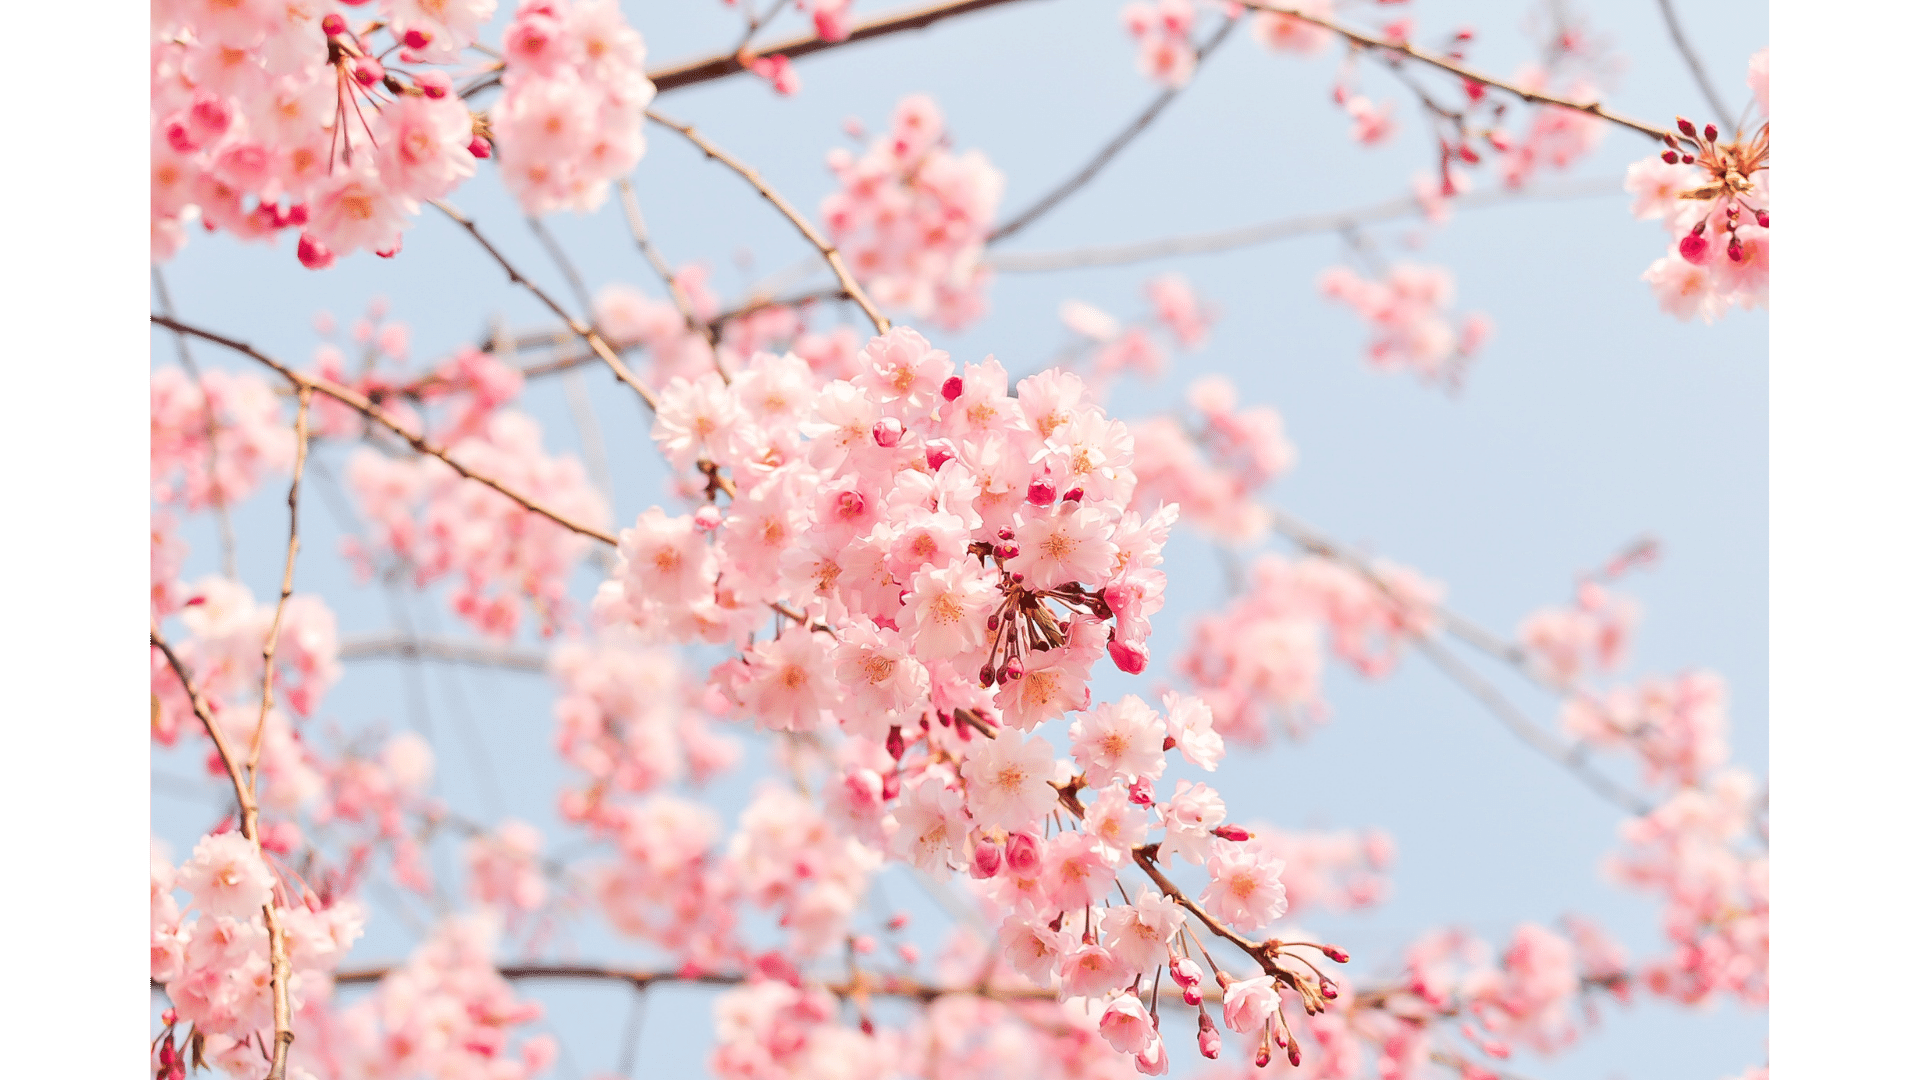 Cherry blossoms in full bloom signalling spring's arrival, perfect for a spring festival guide.